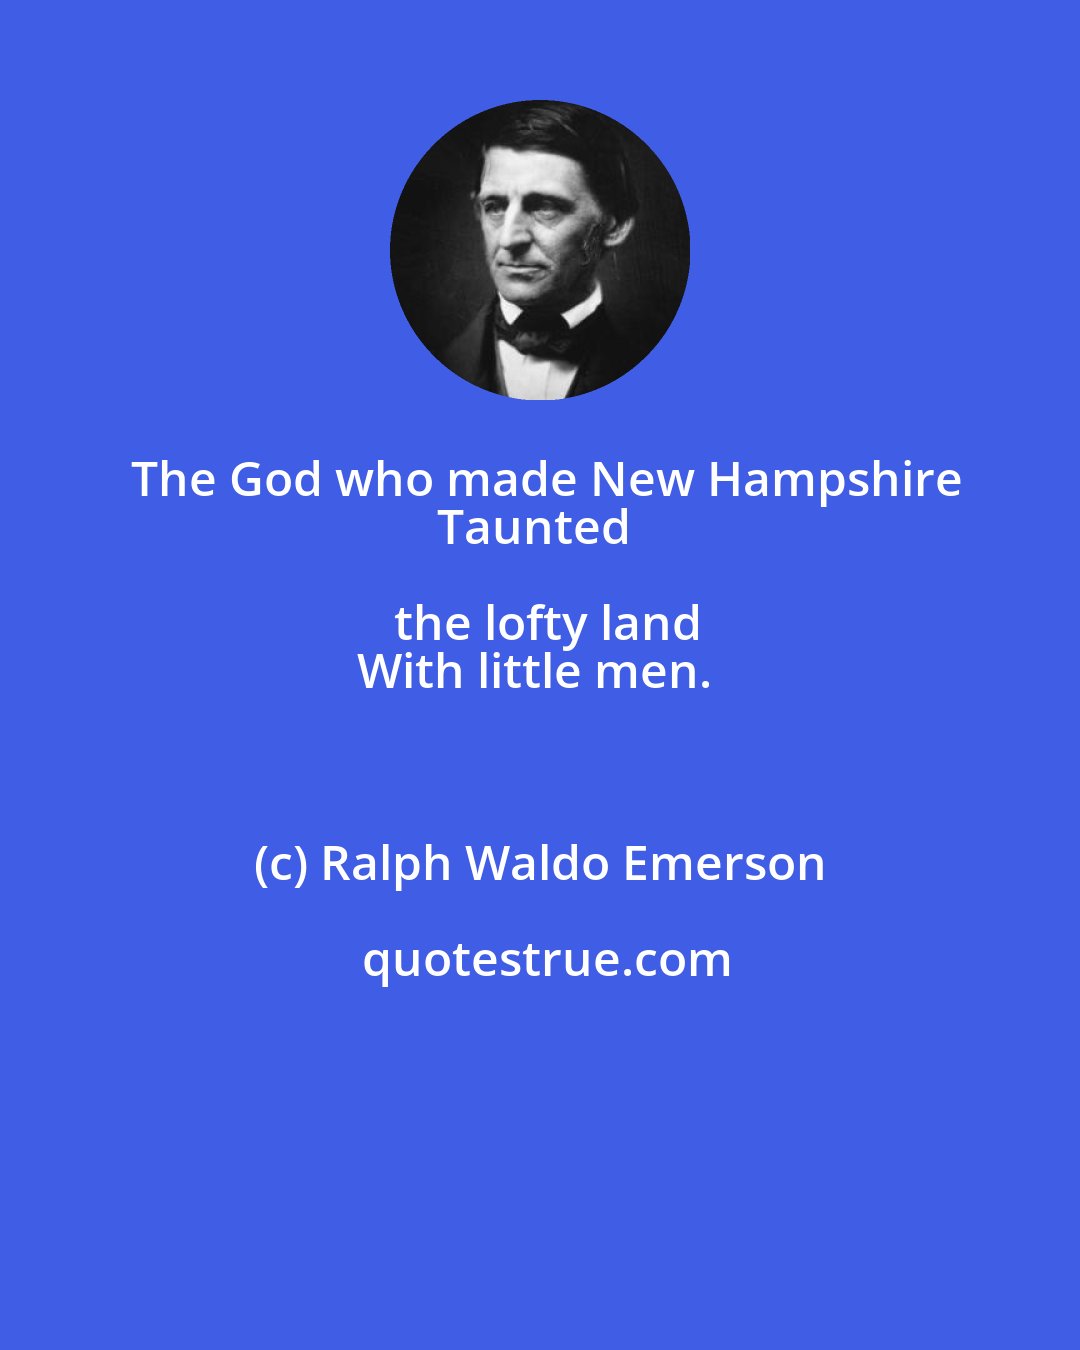 Ralph Waldo Emerson: The God who made New Hampshire
Taunted the lofty land
With little men.